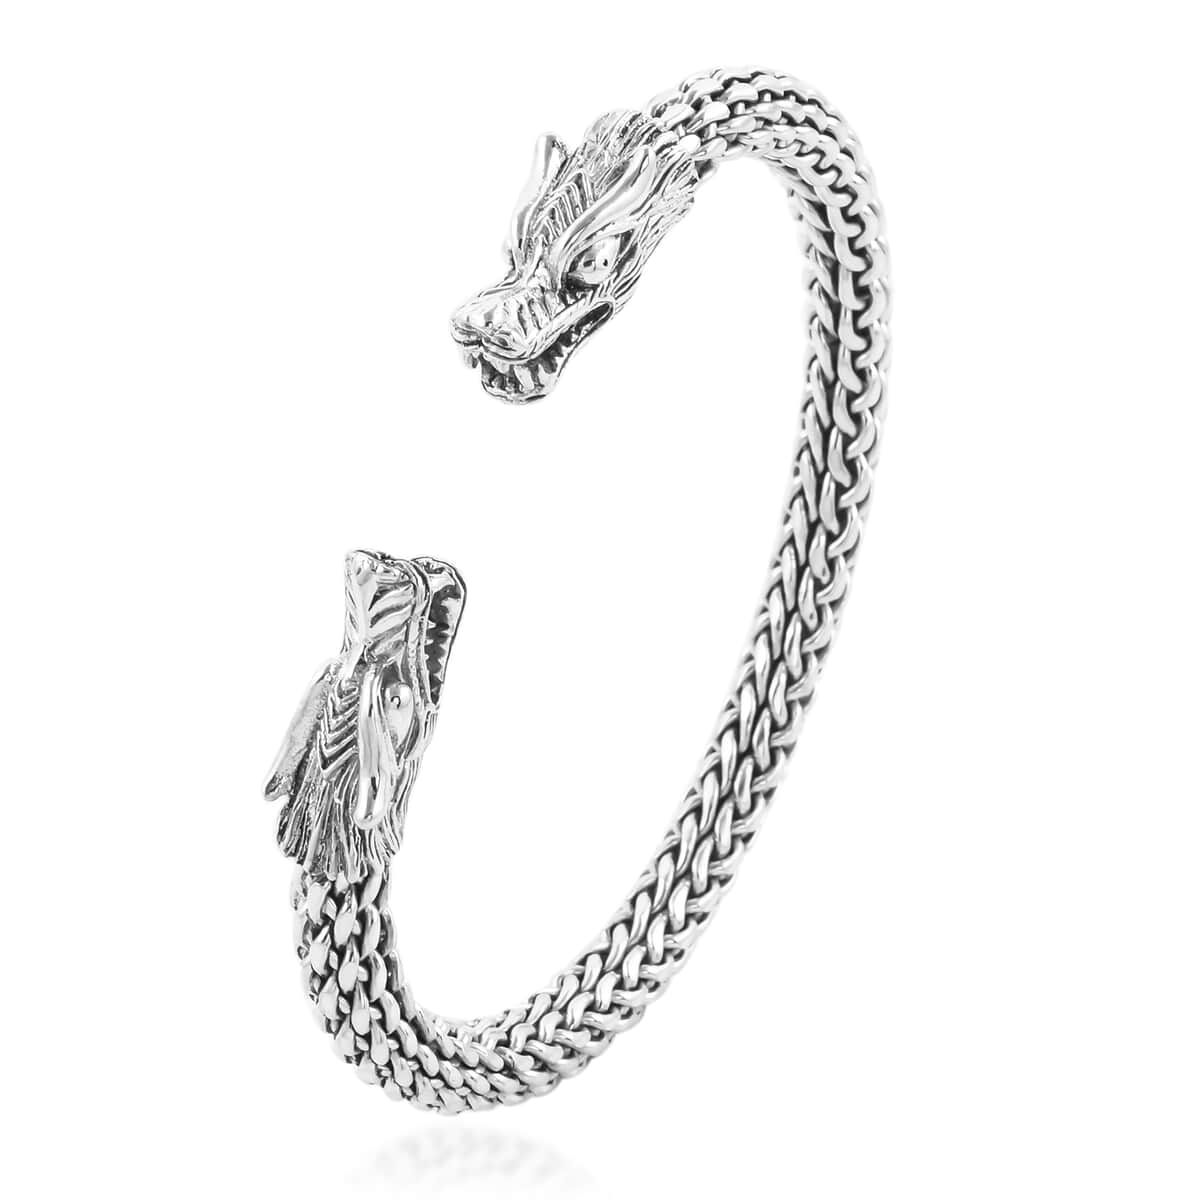 Bali Legacy Sterling Silver Dragon Cuff Bracelet (7.25 in) 49.35 Grams image number 3